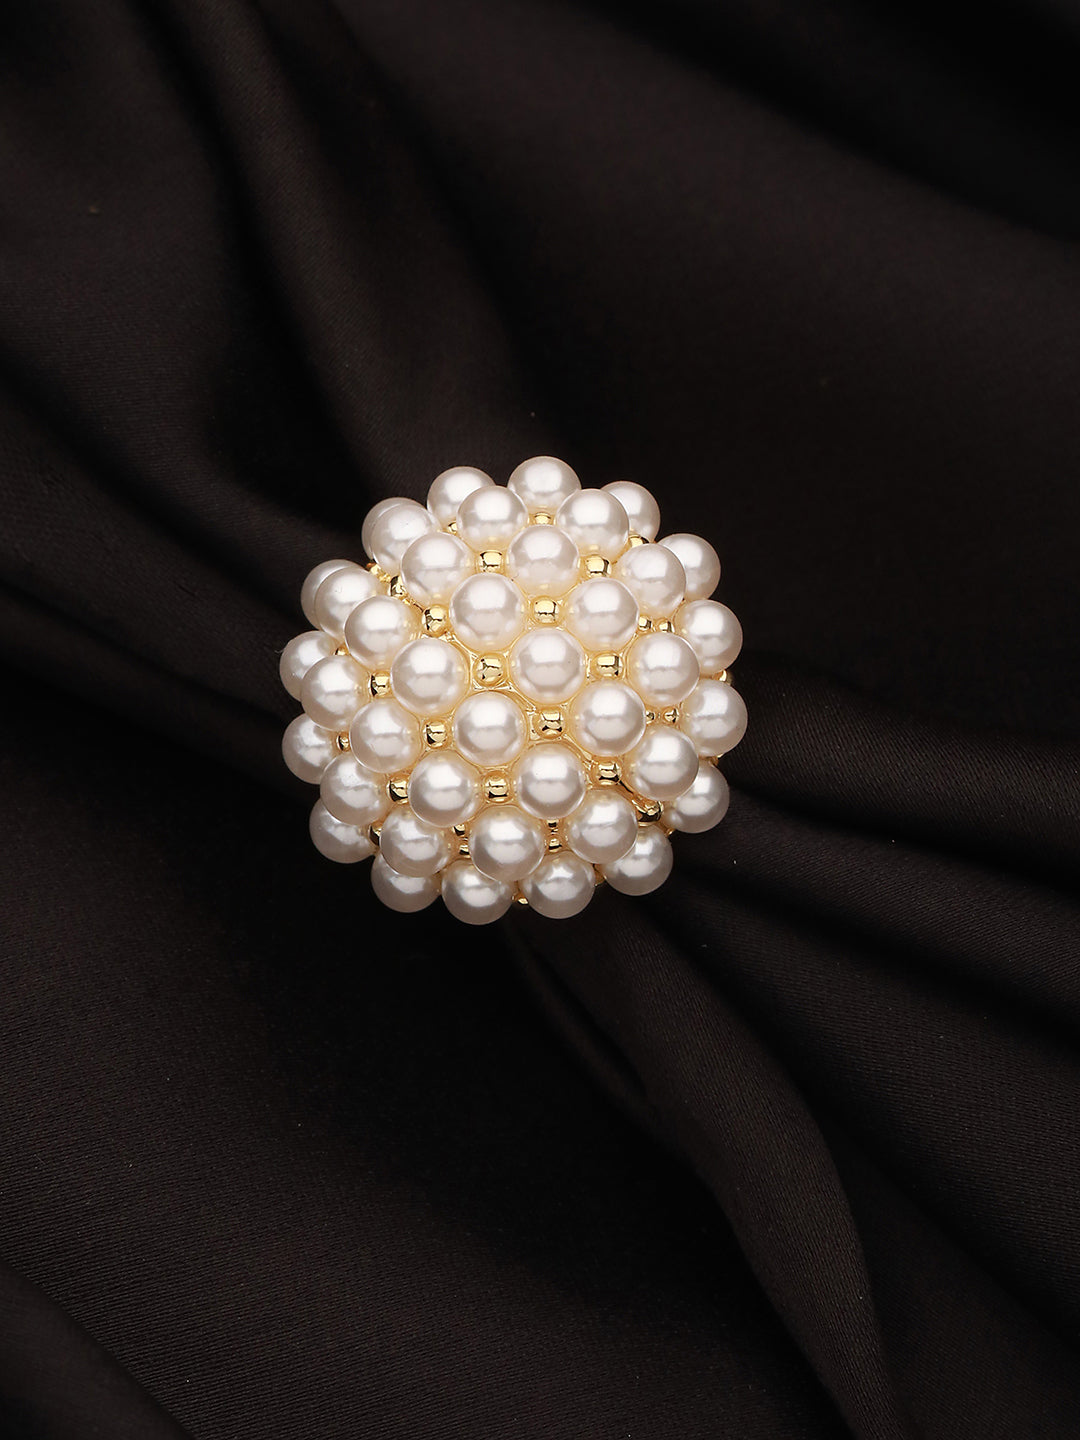 Gold-Plated Artificial Pearls Studded Flower Design Adjustable Finger Ring - Jazzandsizzle